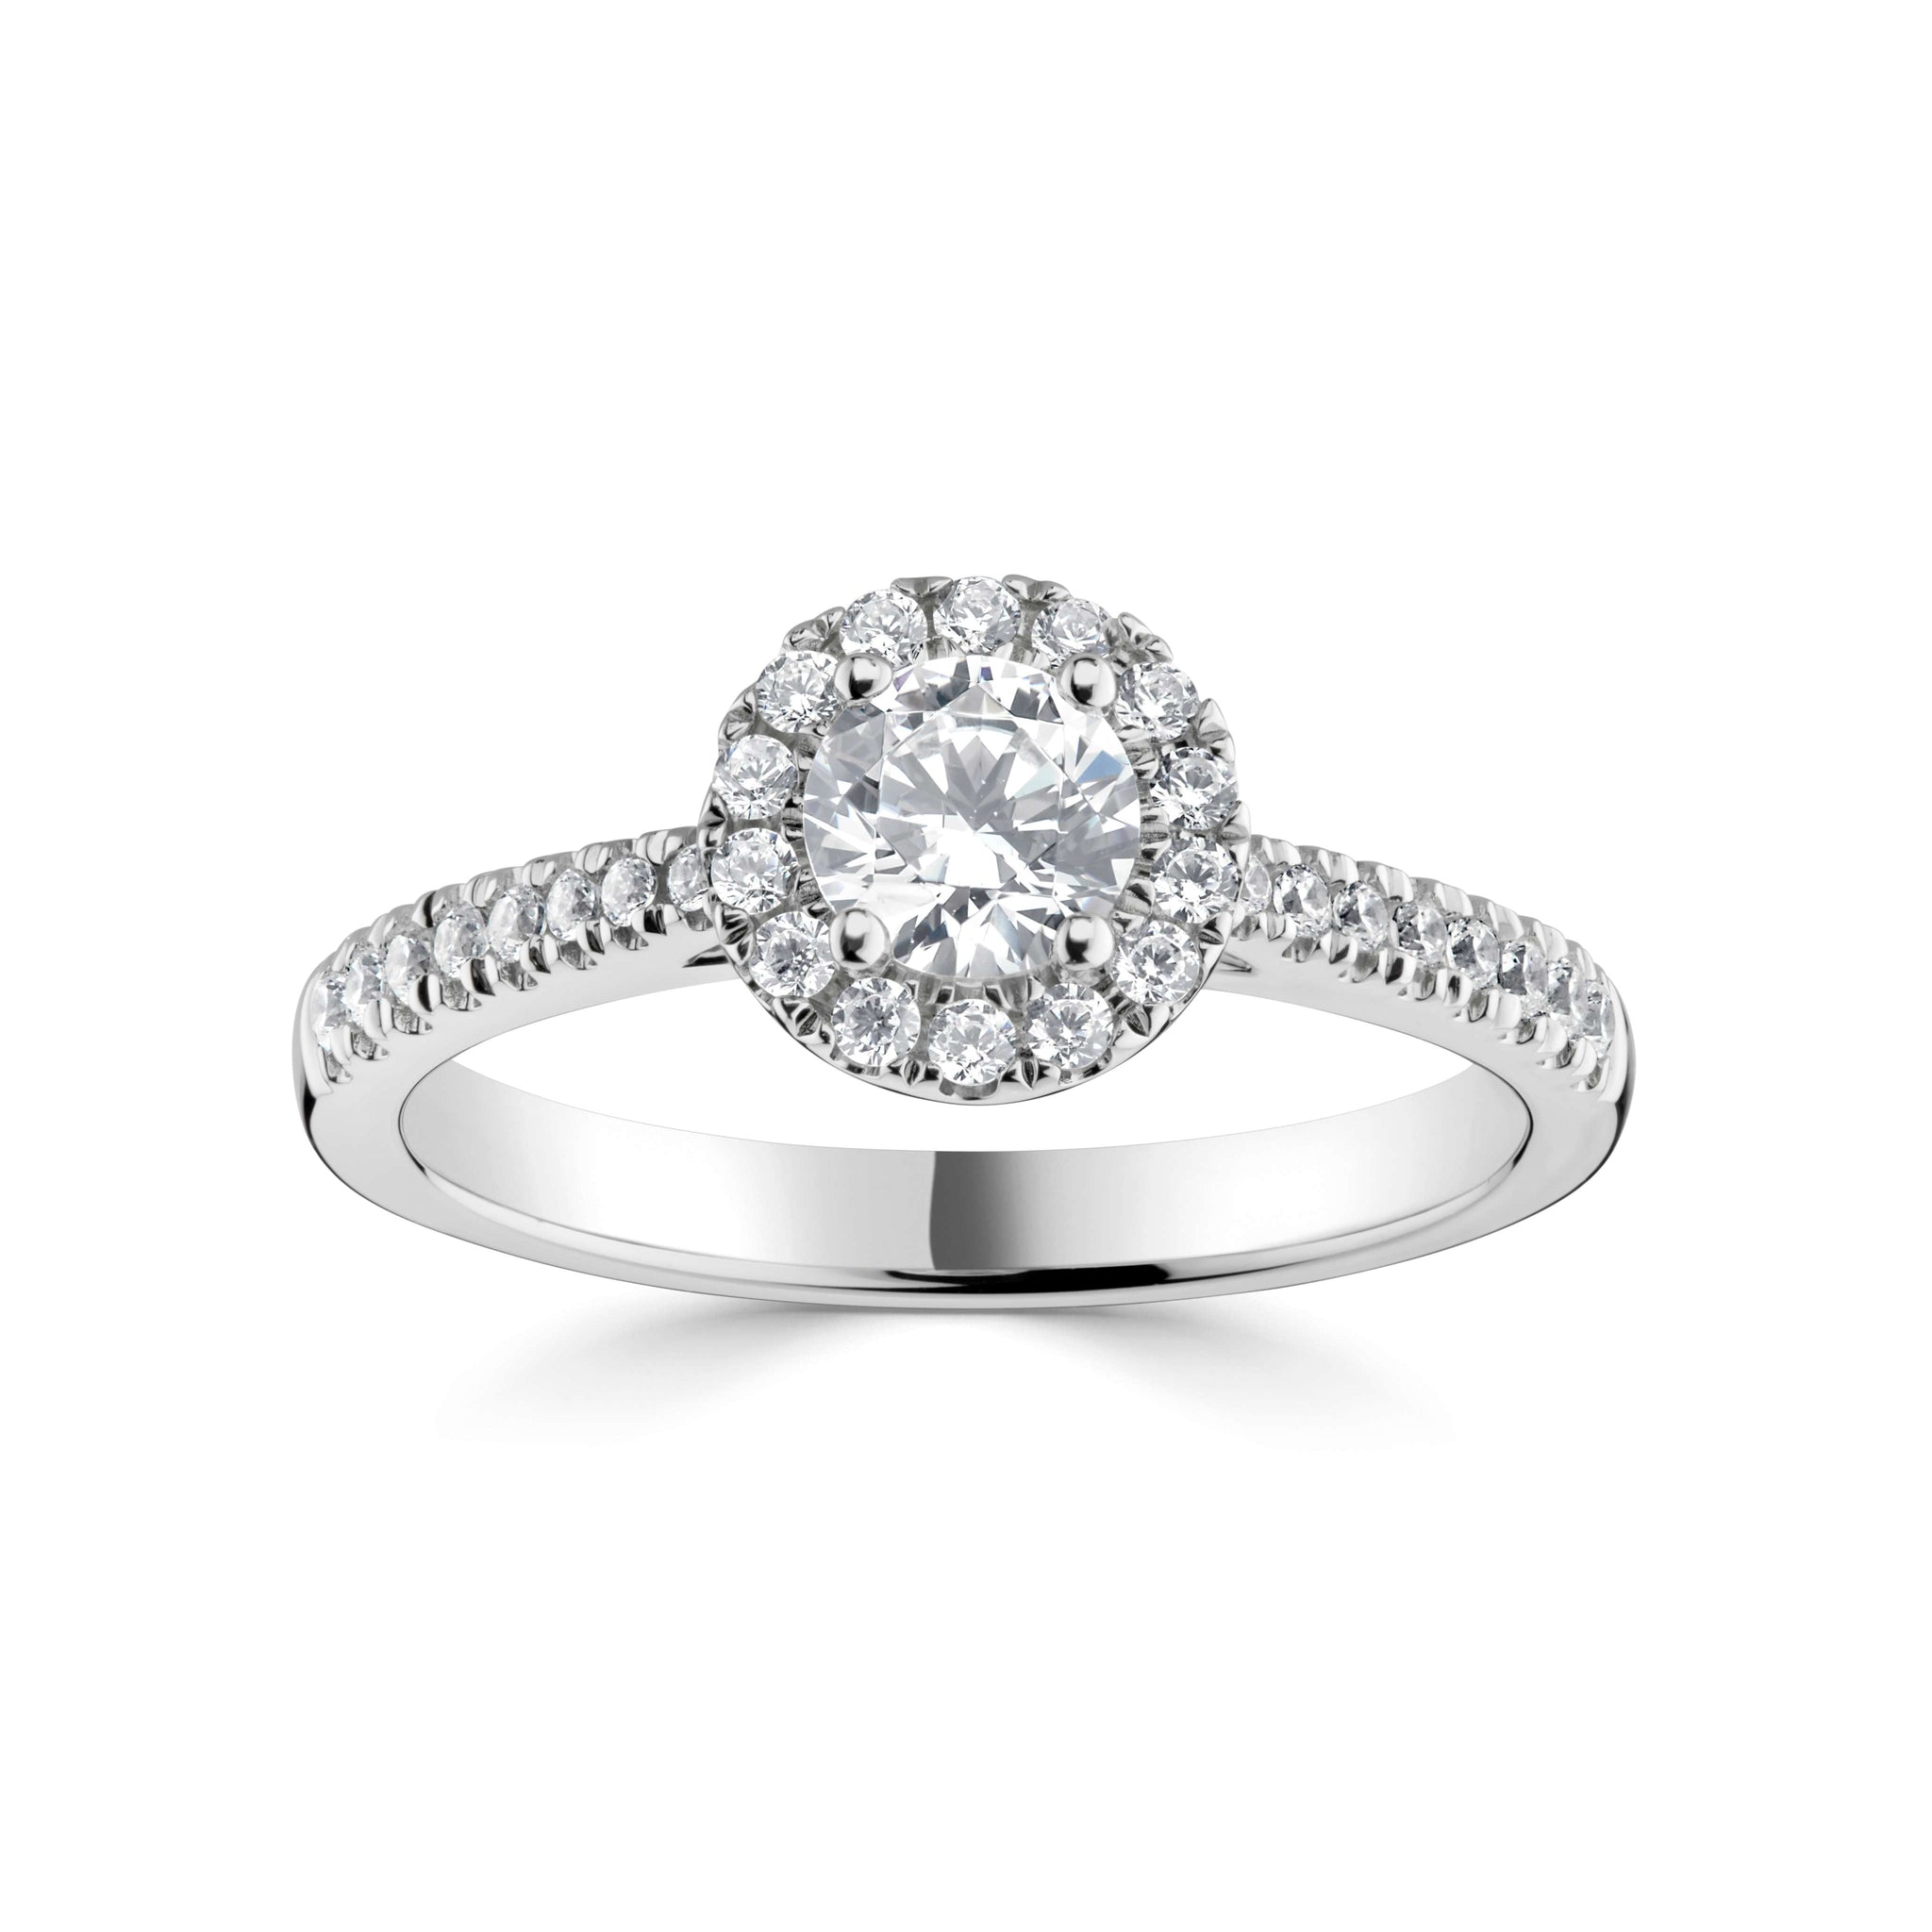 Everleigh *Select a Round Diamond 0.25ct or above